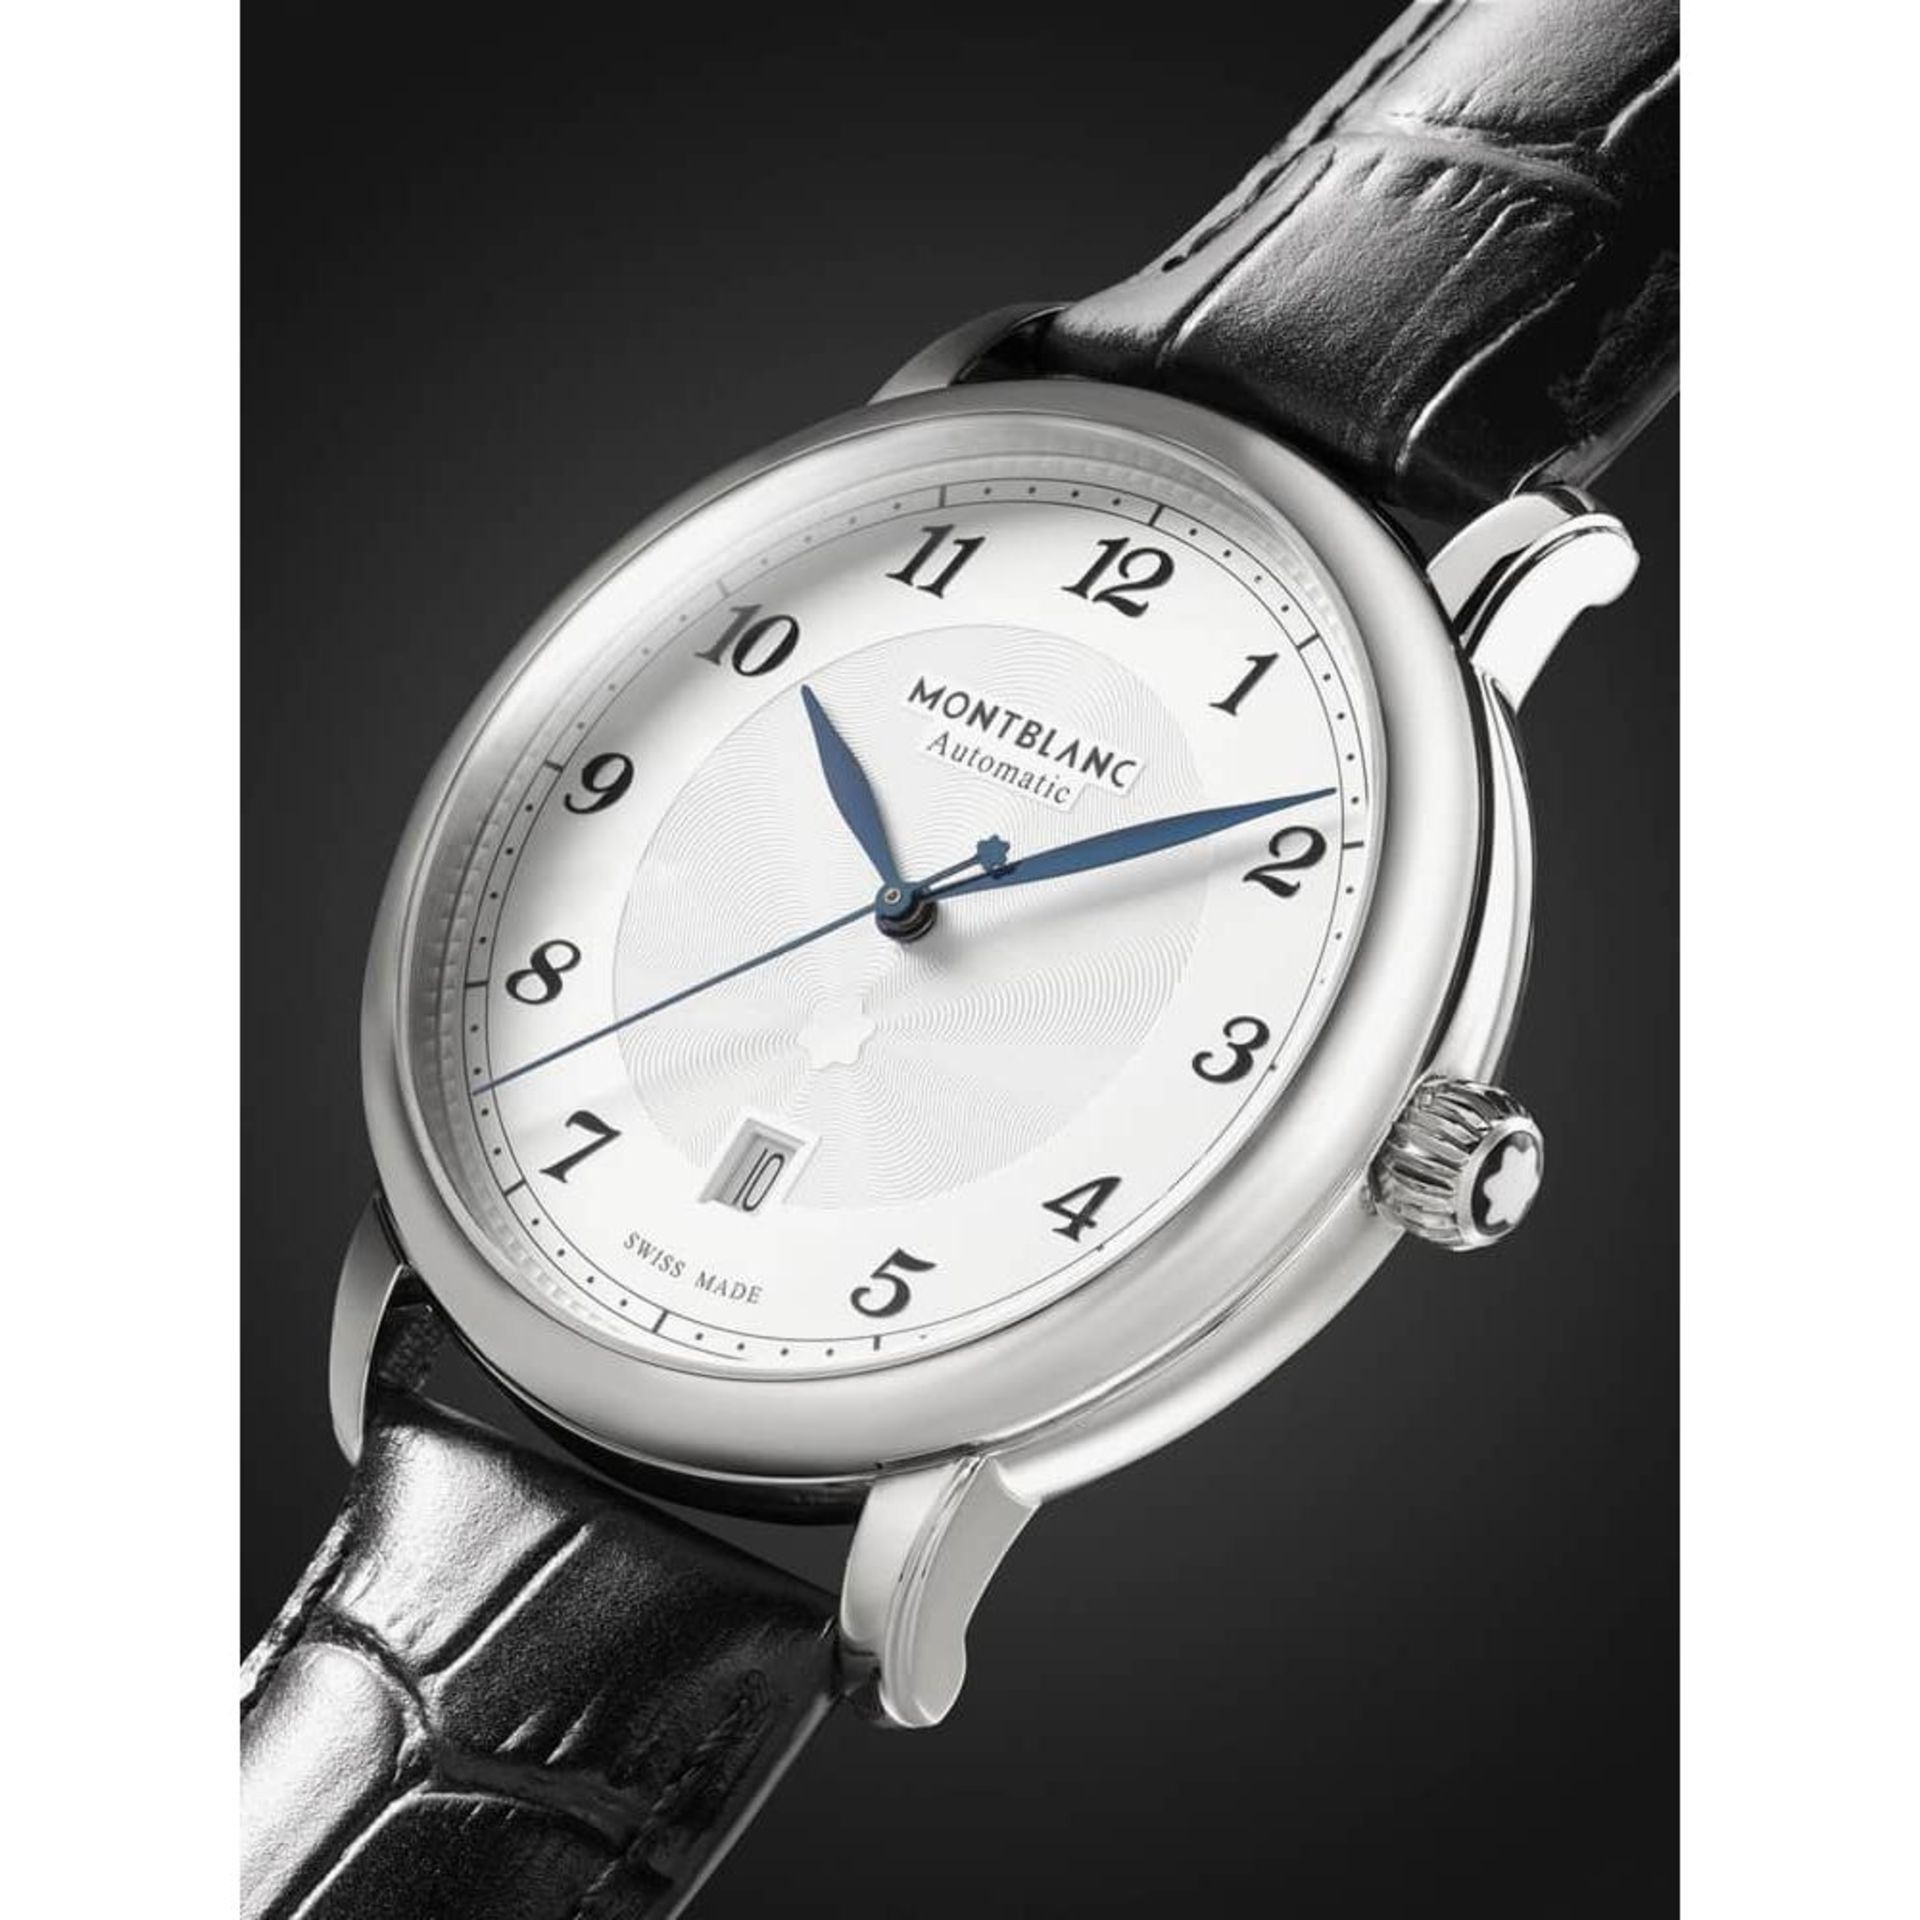 BRAND NEW MONTBLANC MENS STAR LEGACY AUTOMATIC WHITE DIAL WATCH (687) RRP £2800 - Image 4 of 5